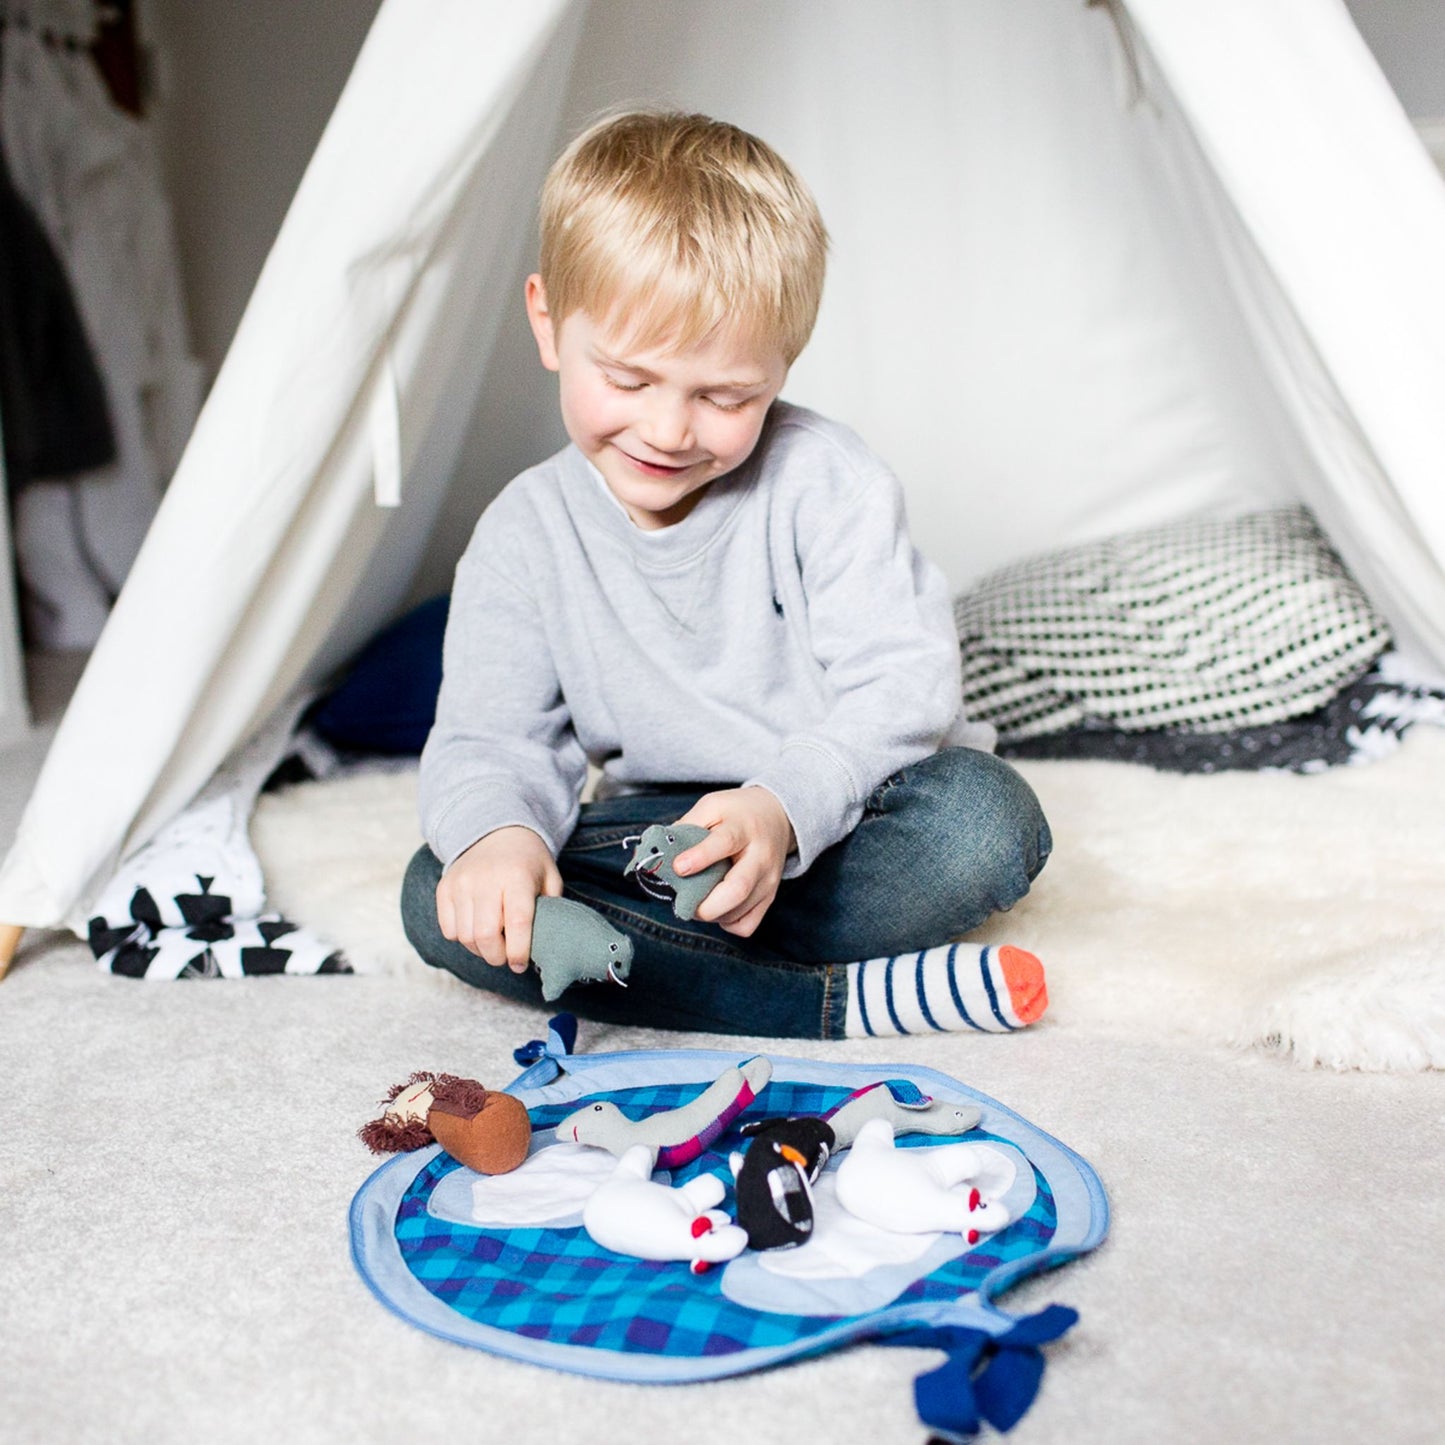 Fair trade cotton Arctic Play Set from Weaving Hope toys